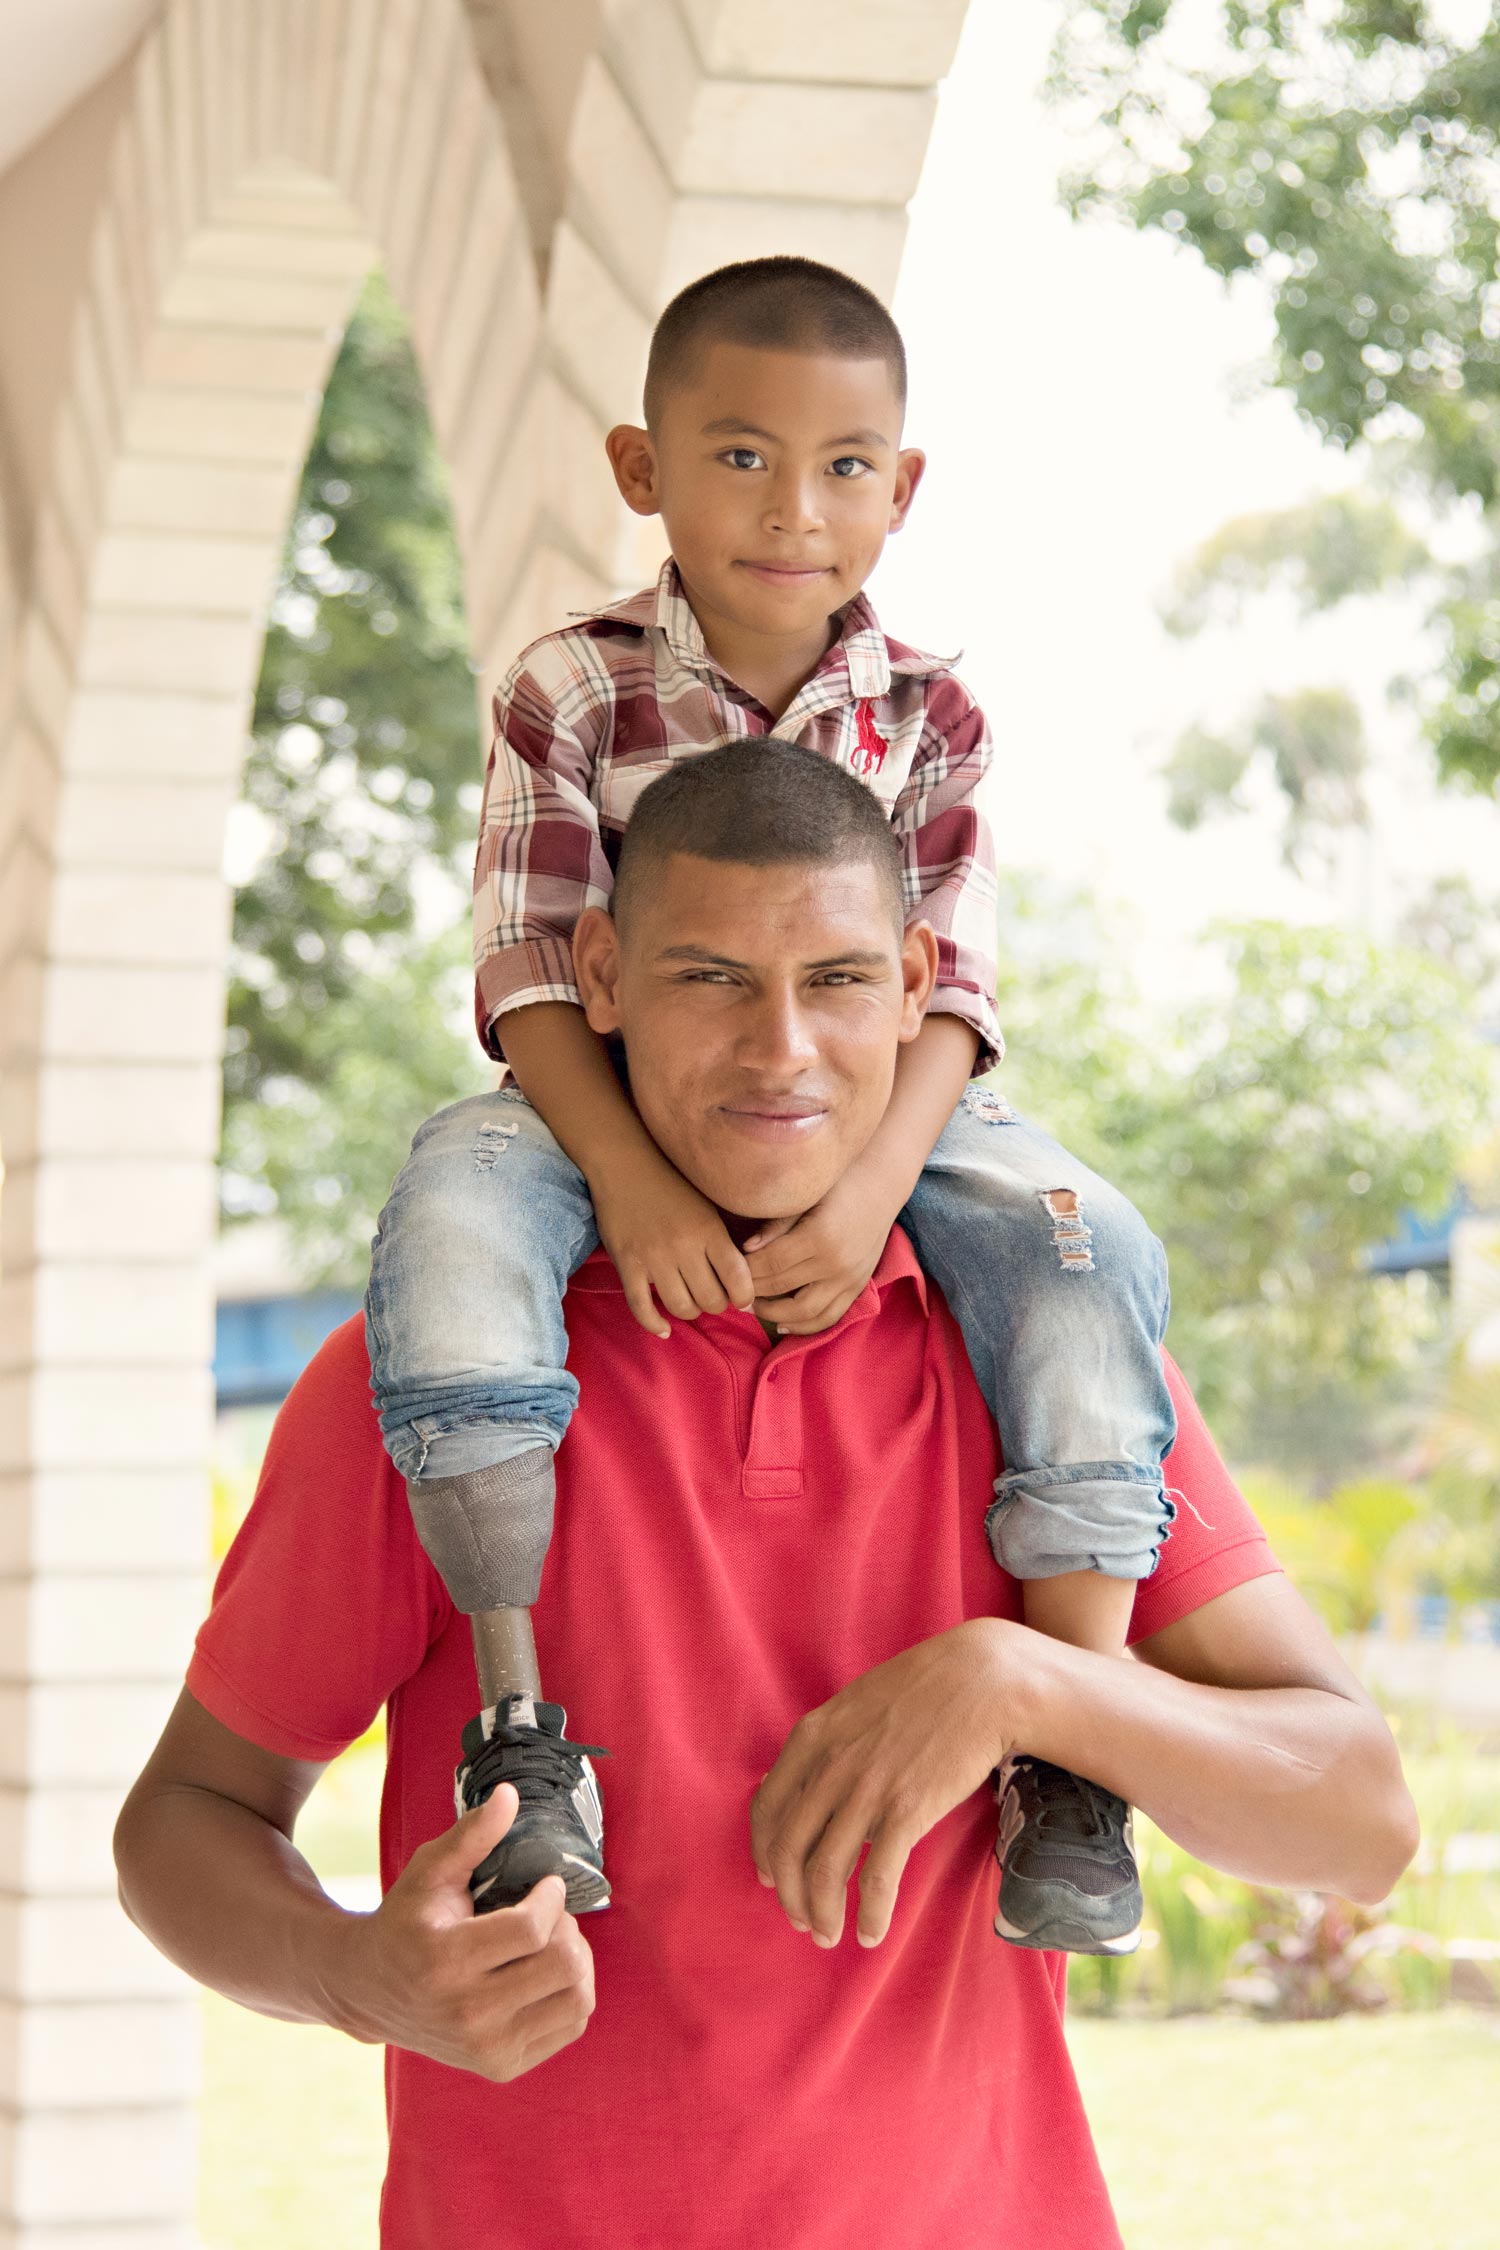 image of a boy sitting on his father's shoulders